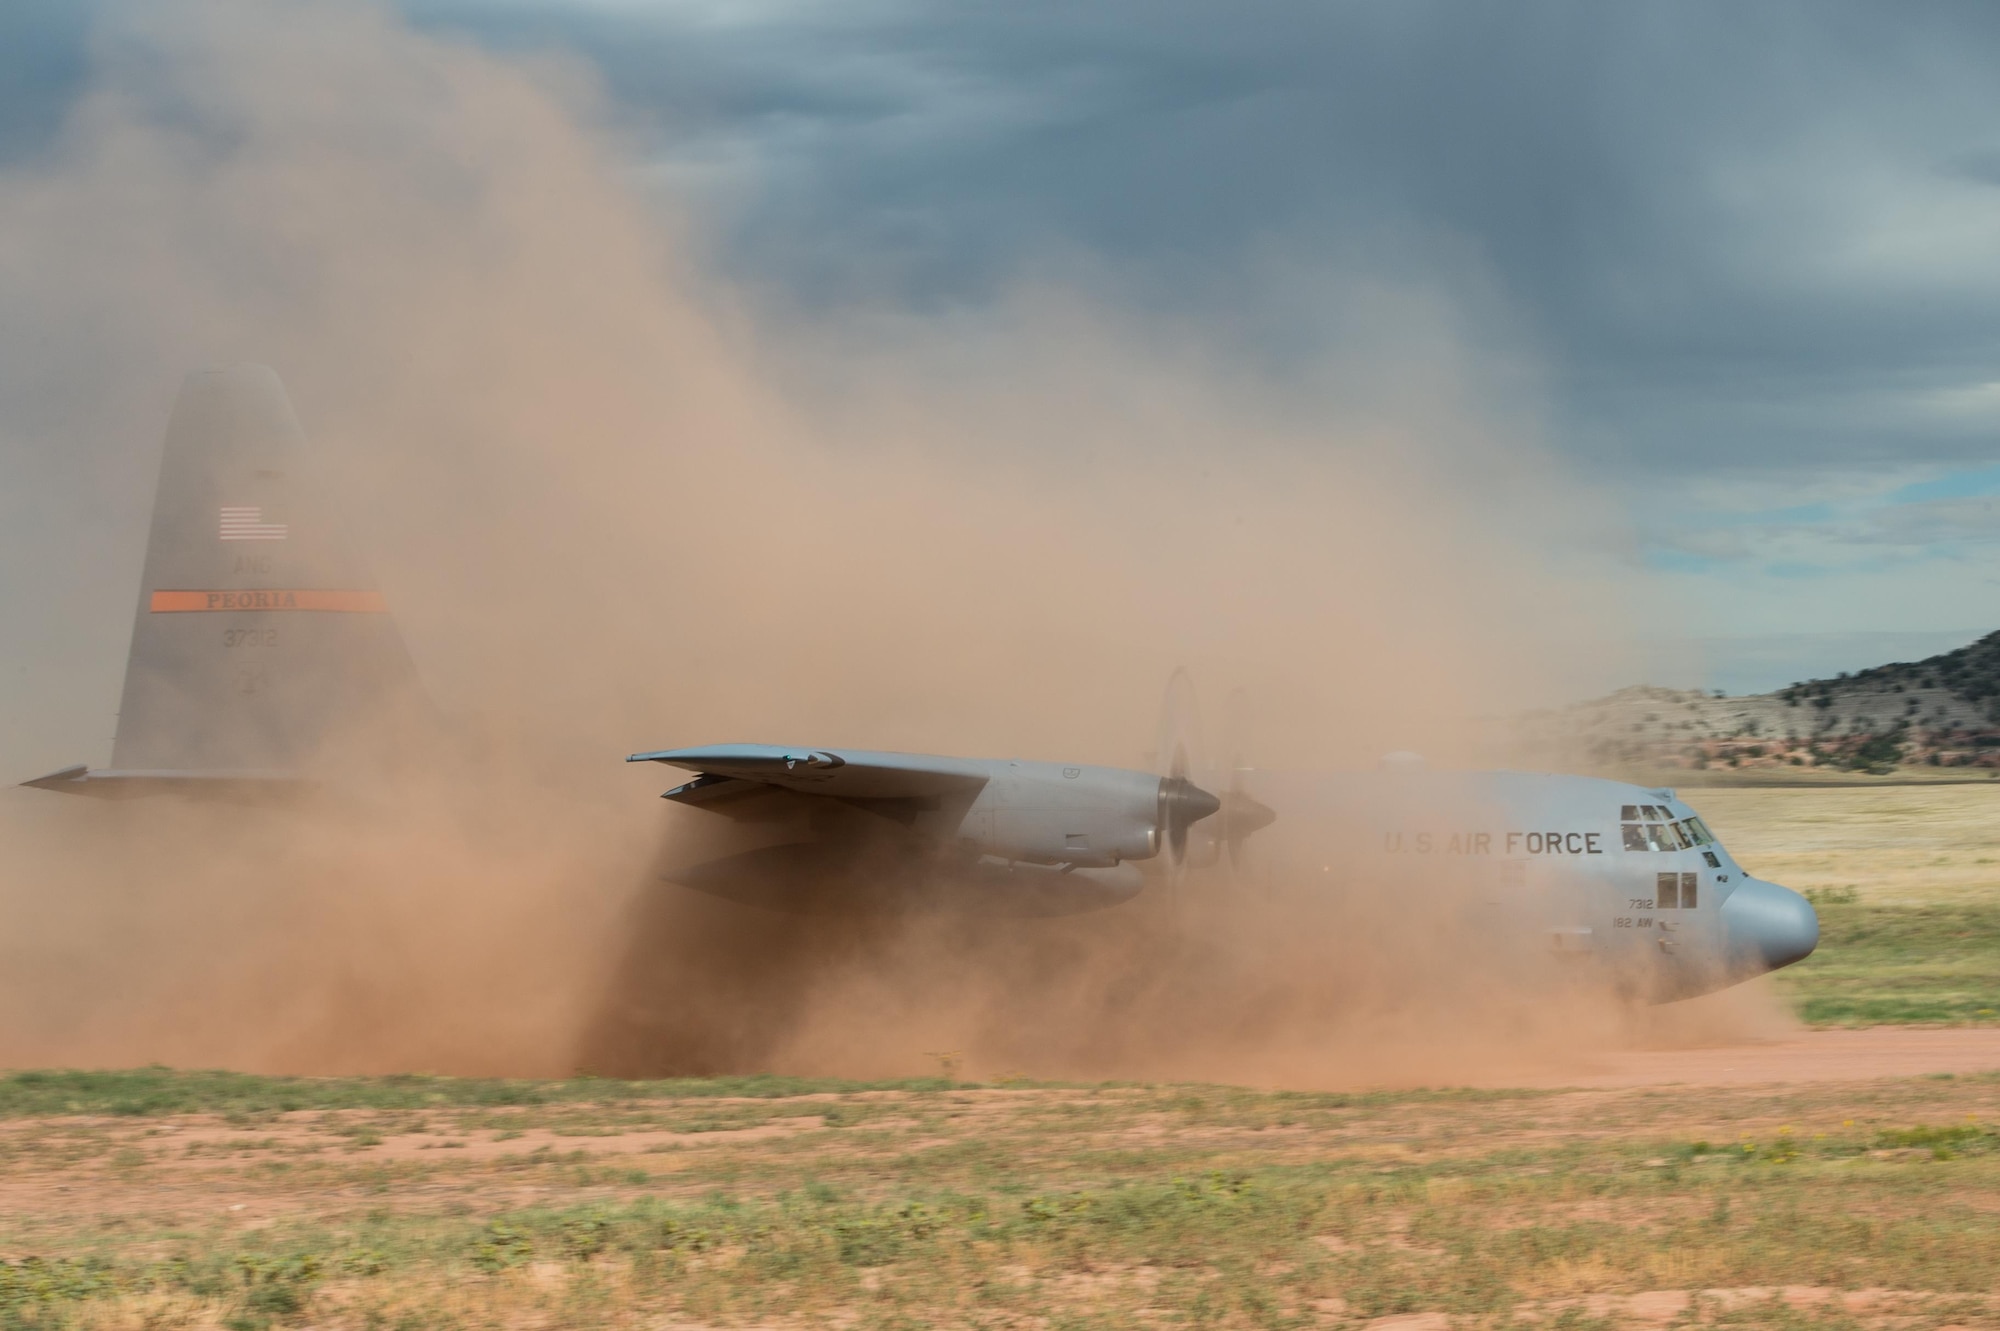 An Illinois Air National Guard C-130 Hercules aircraft lands at the Red Devil Landing Zone during Exercise Cerberus Strike 16-02 on Fort Carson, Colorado, Sept. 12, 2016. C-Strike is a joint exercise where contingency response forces rehearse potential real-world situations by training with Army counterparts in cargo uploading and downloading on aircraft, aircraft engine running off-loads, communications, aerial port procedures, and air mobility liaison officer operations with airdrops from aircraft. (U.S. Air Force photo by Master Sgt. Joseph Swafford)
